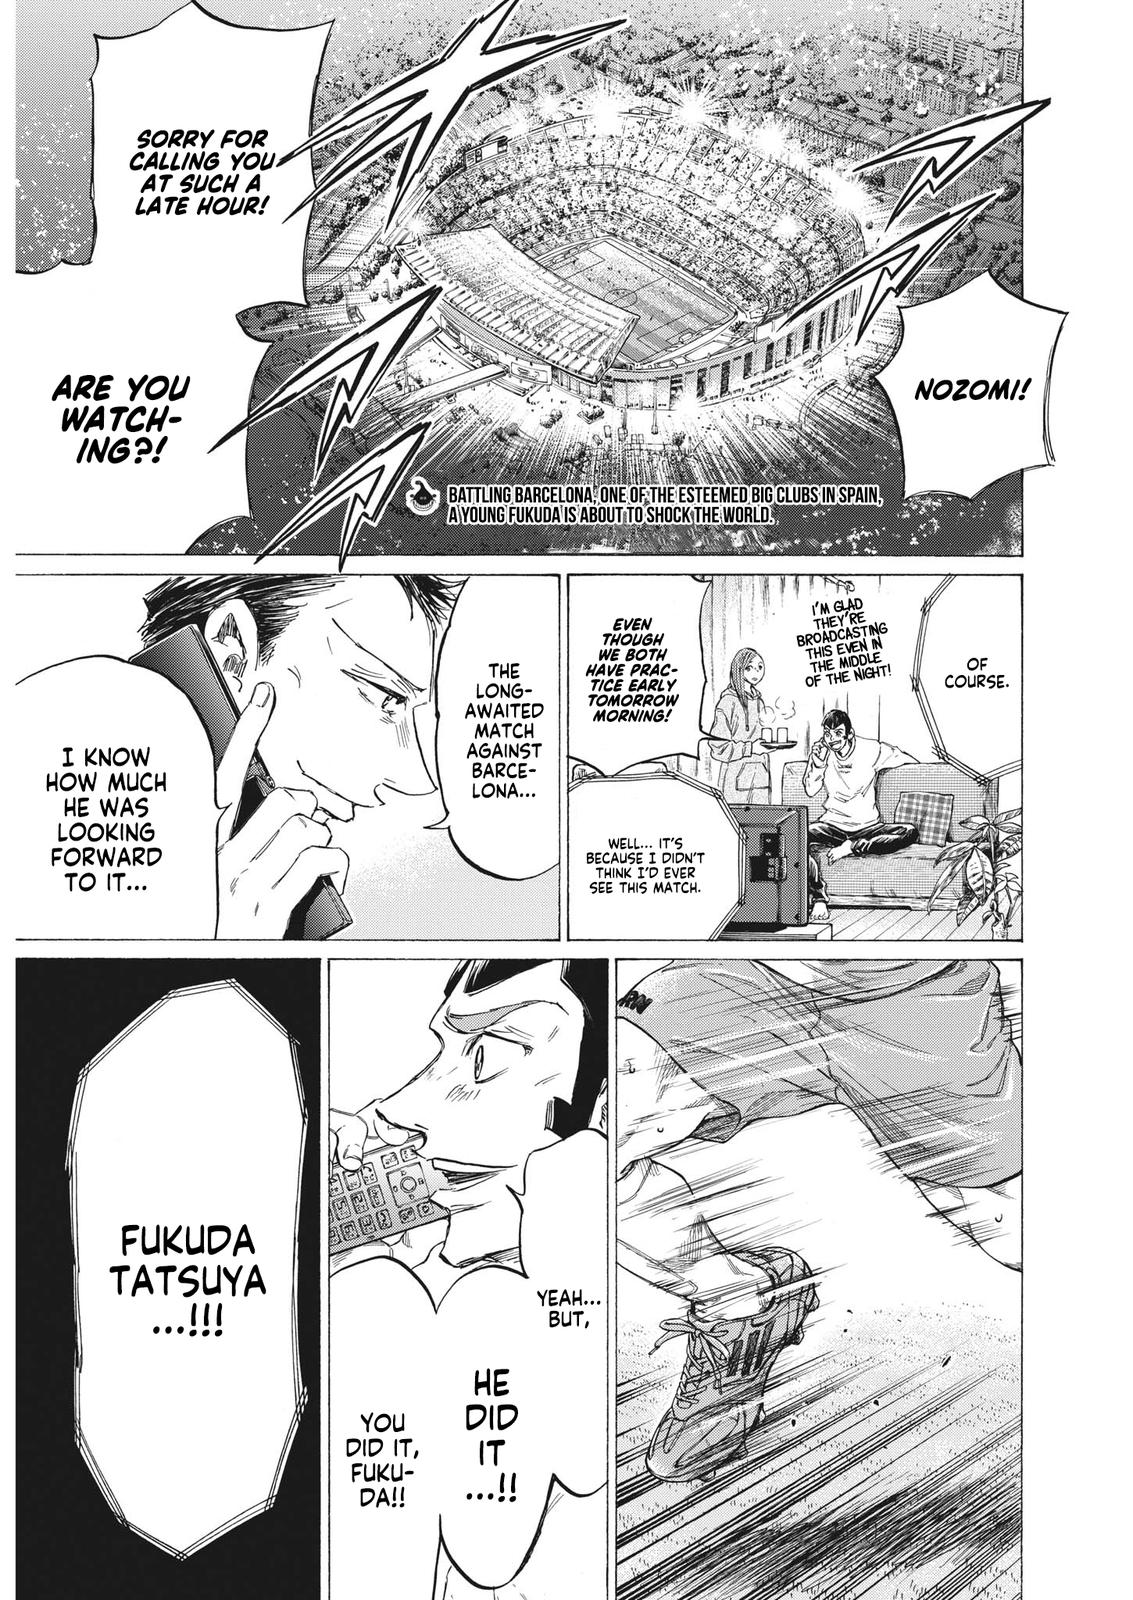 Ao Ashi, Chapter 334  TcbScans Org - Free Manga Online in High Quality